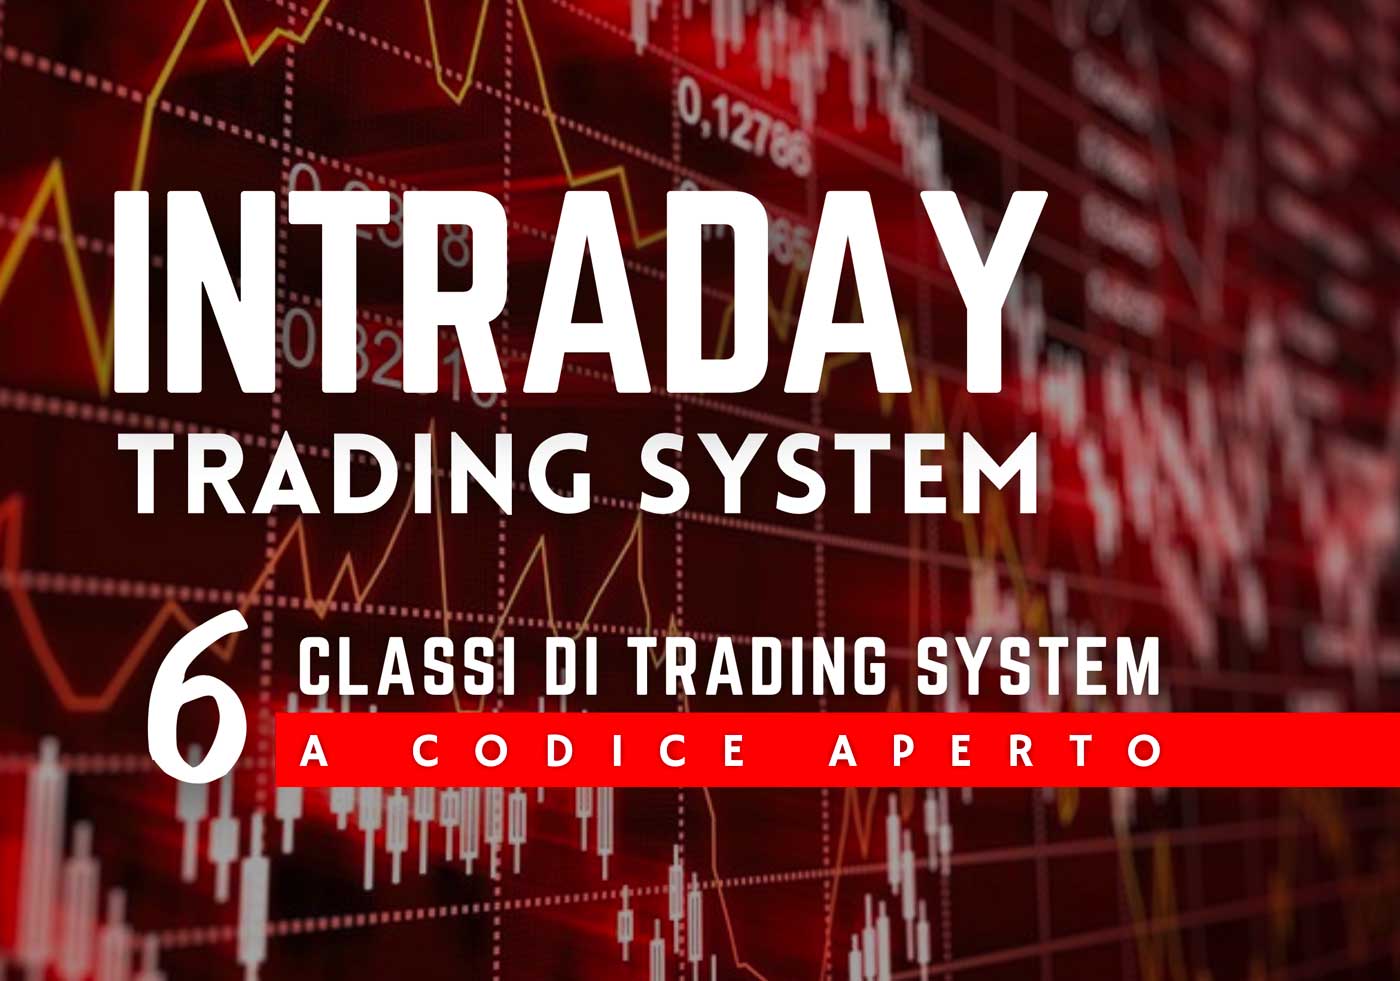 qtlabmiglior corso trading system and methods, online trading system e come costruire trading system automatico, intraday trading system qtlab